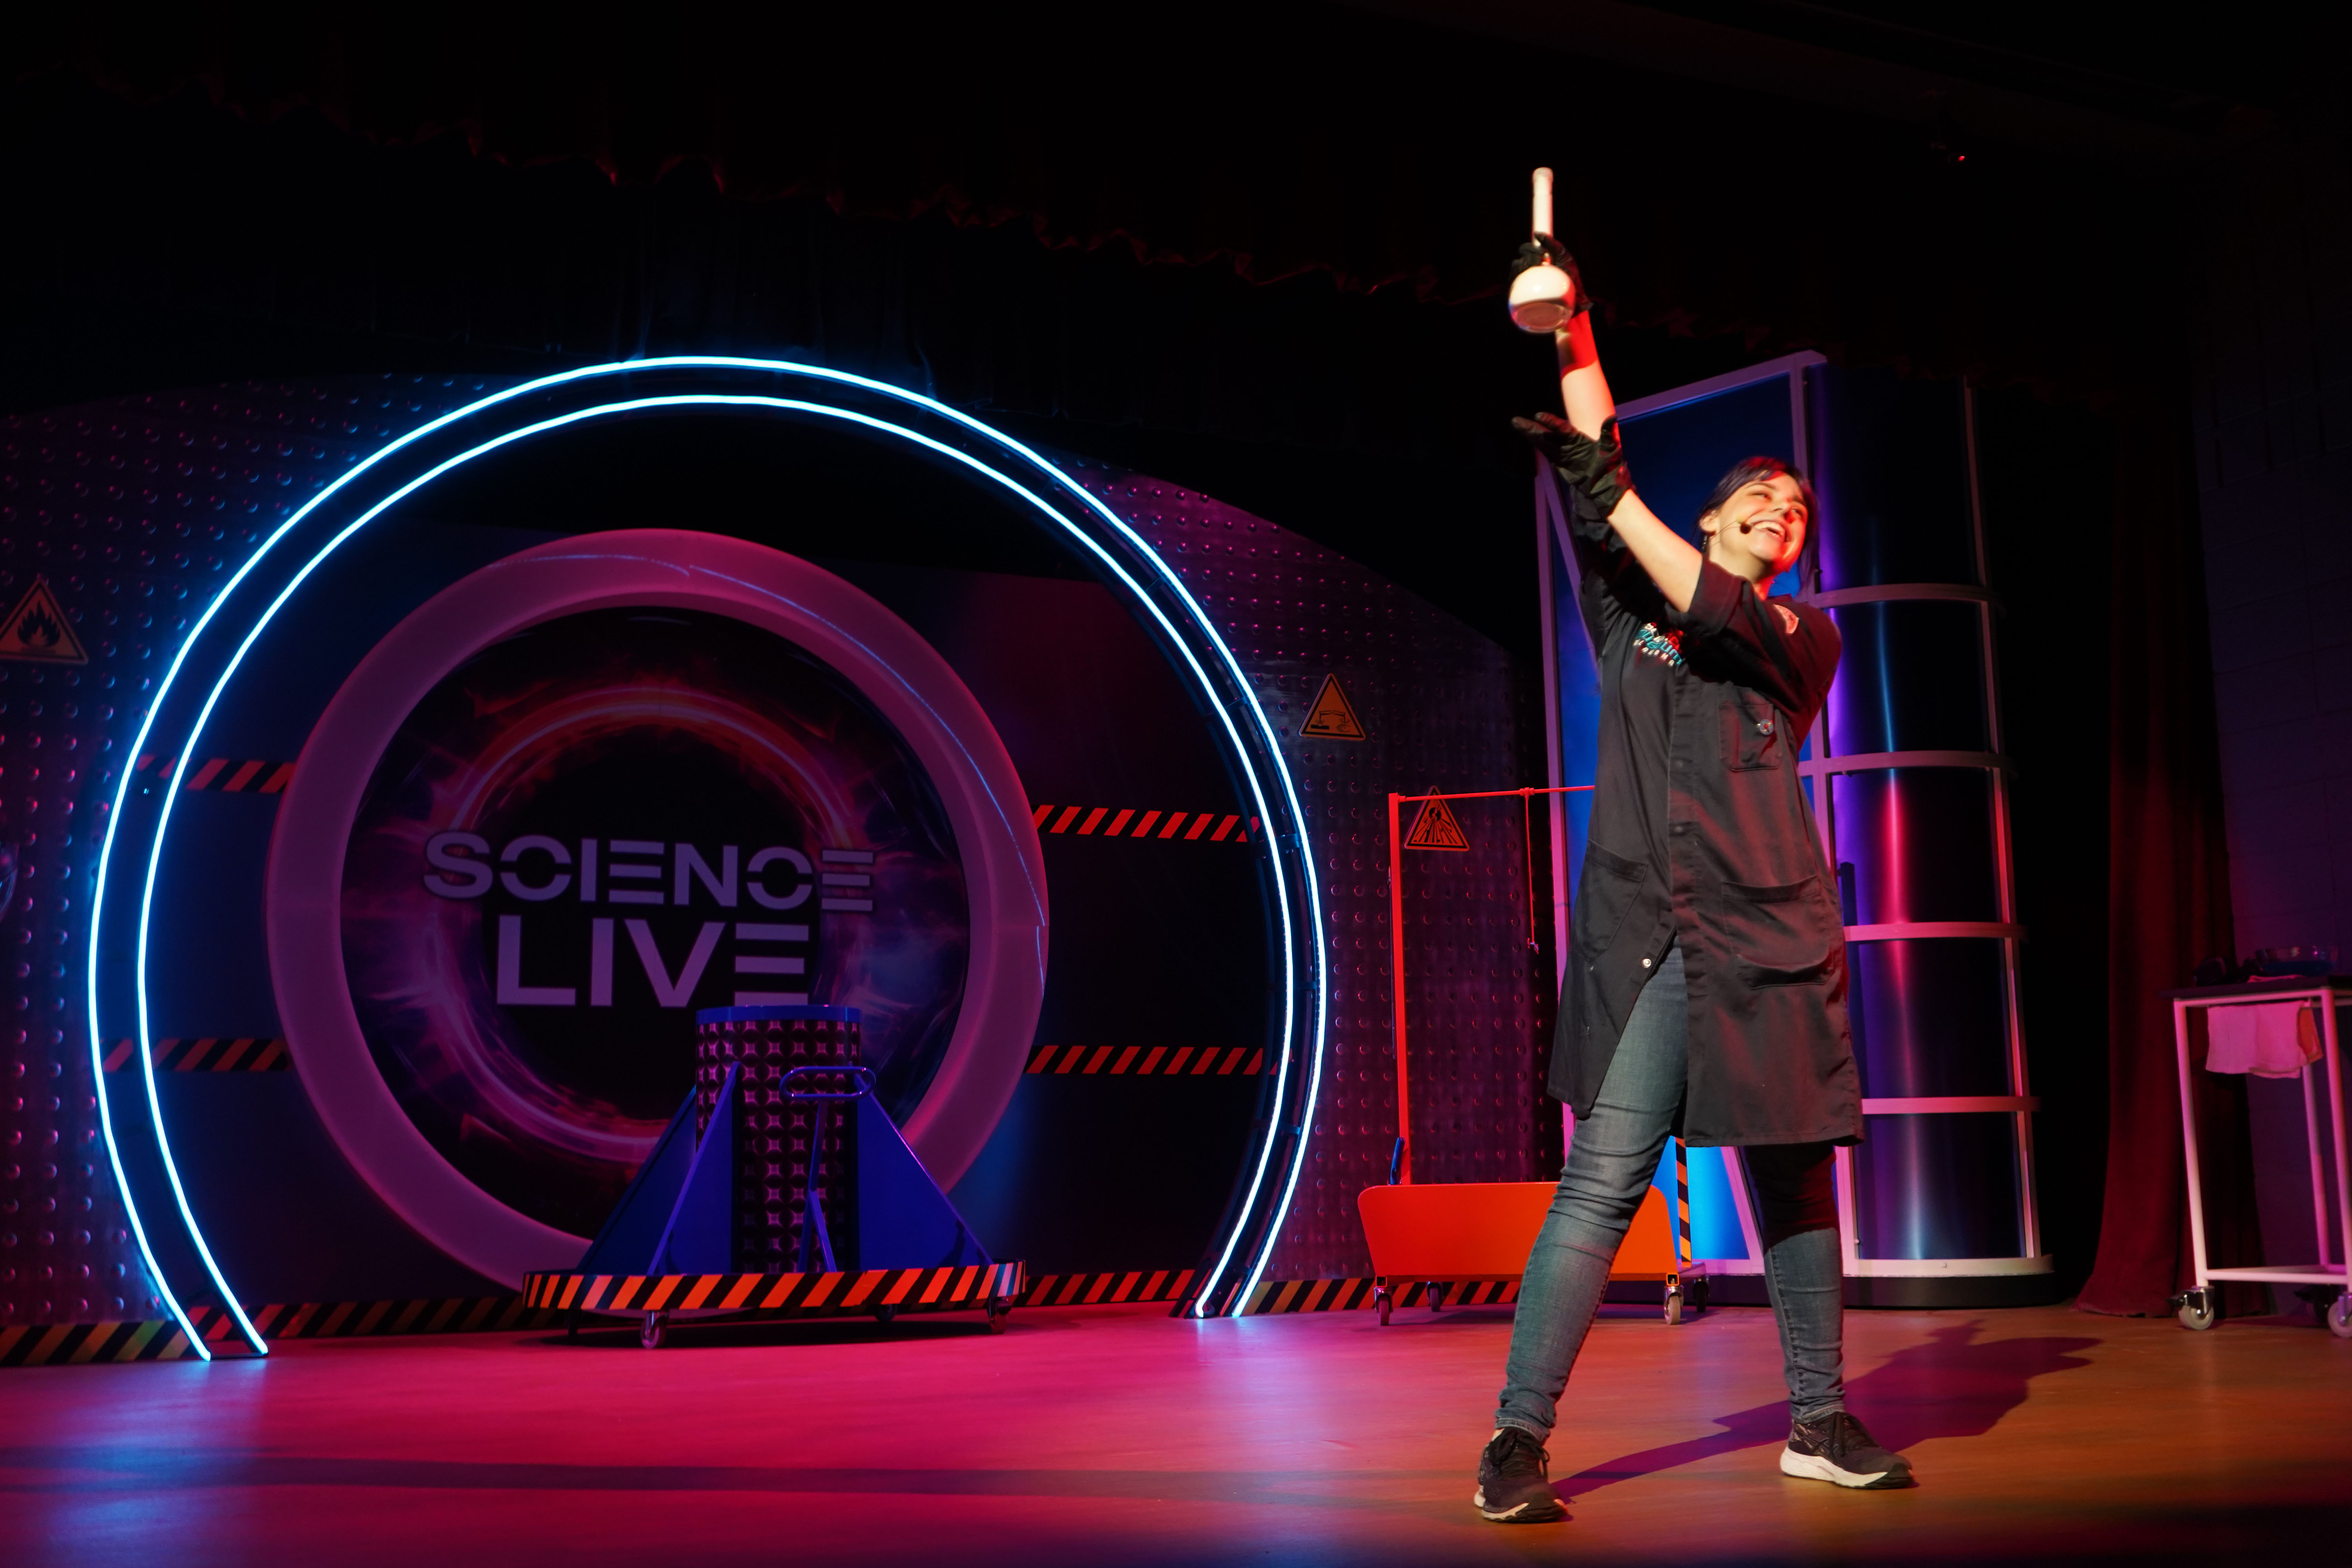 Science Live at Science Museum Oklahoma